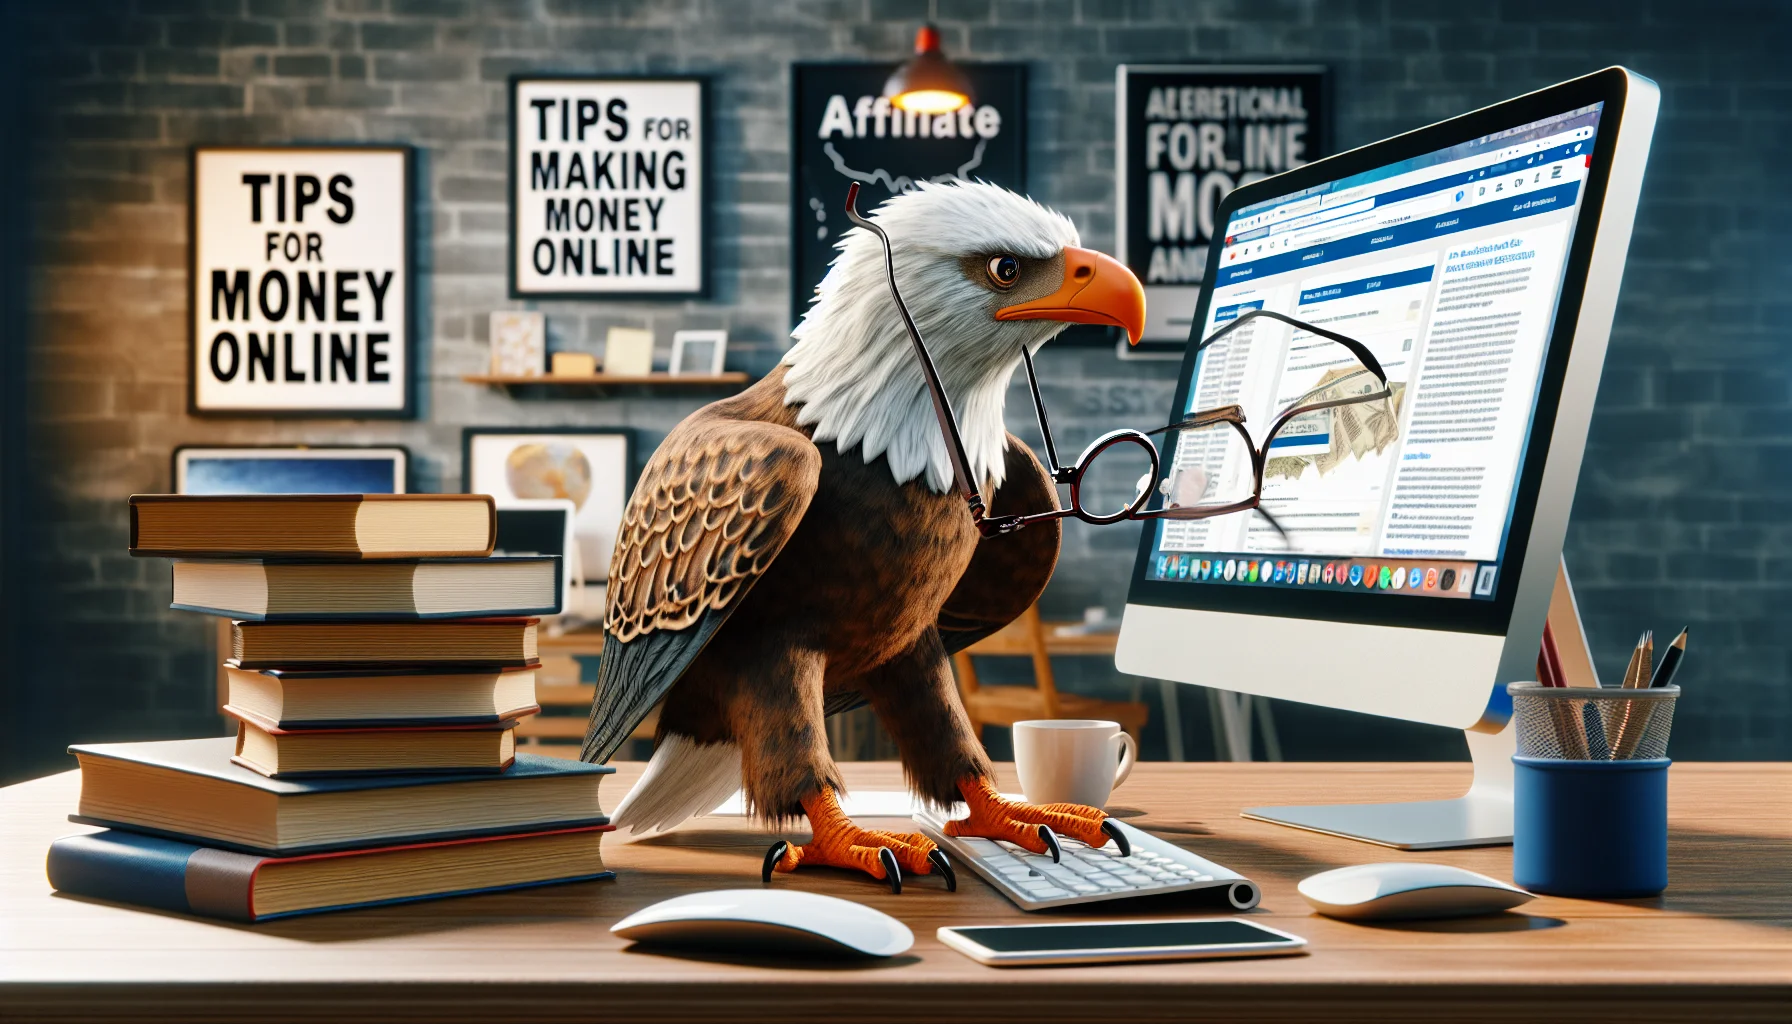 Envision an amusing, life-like scene highlighting an affiliate marketing program, symbolised by the American Eagle, which is a renowned bird often associated with strength and freedom. This scenario is intimately linked with the concept of generating income digitally. Imagine a computer, with multiple internet tabs open, all related to this affiliate program. Add to this picture an animated American Eagle perched on the computer monitor, wearing reading glasses and flipping through a virtual book titled 'Tips for Making Money Online'. The room can be adorned with numerous inspirational and motivational posters associated with online entrepreneurship.